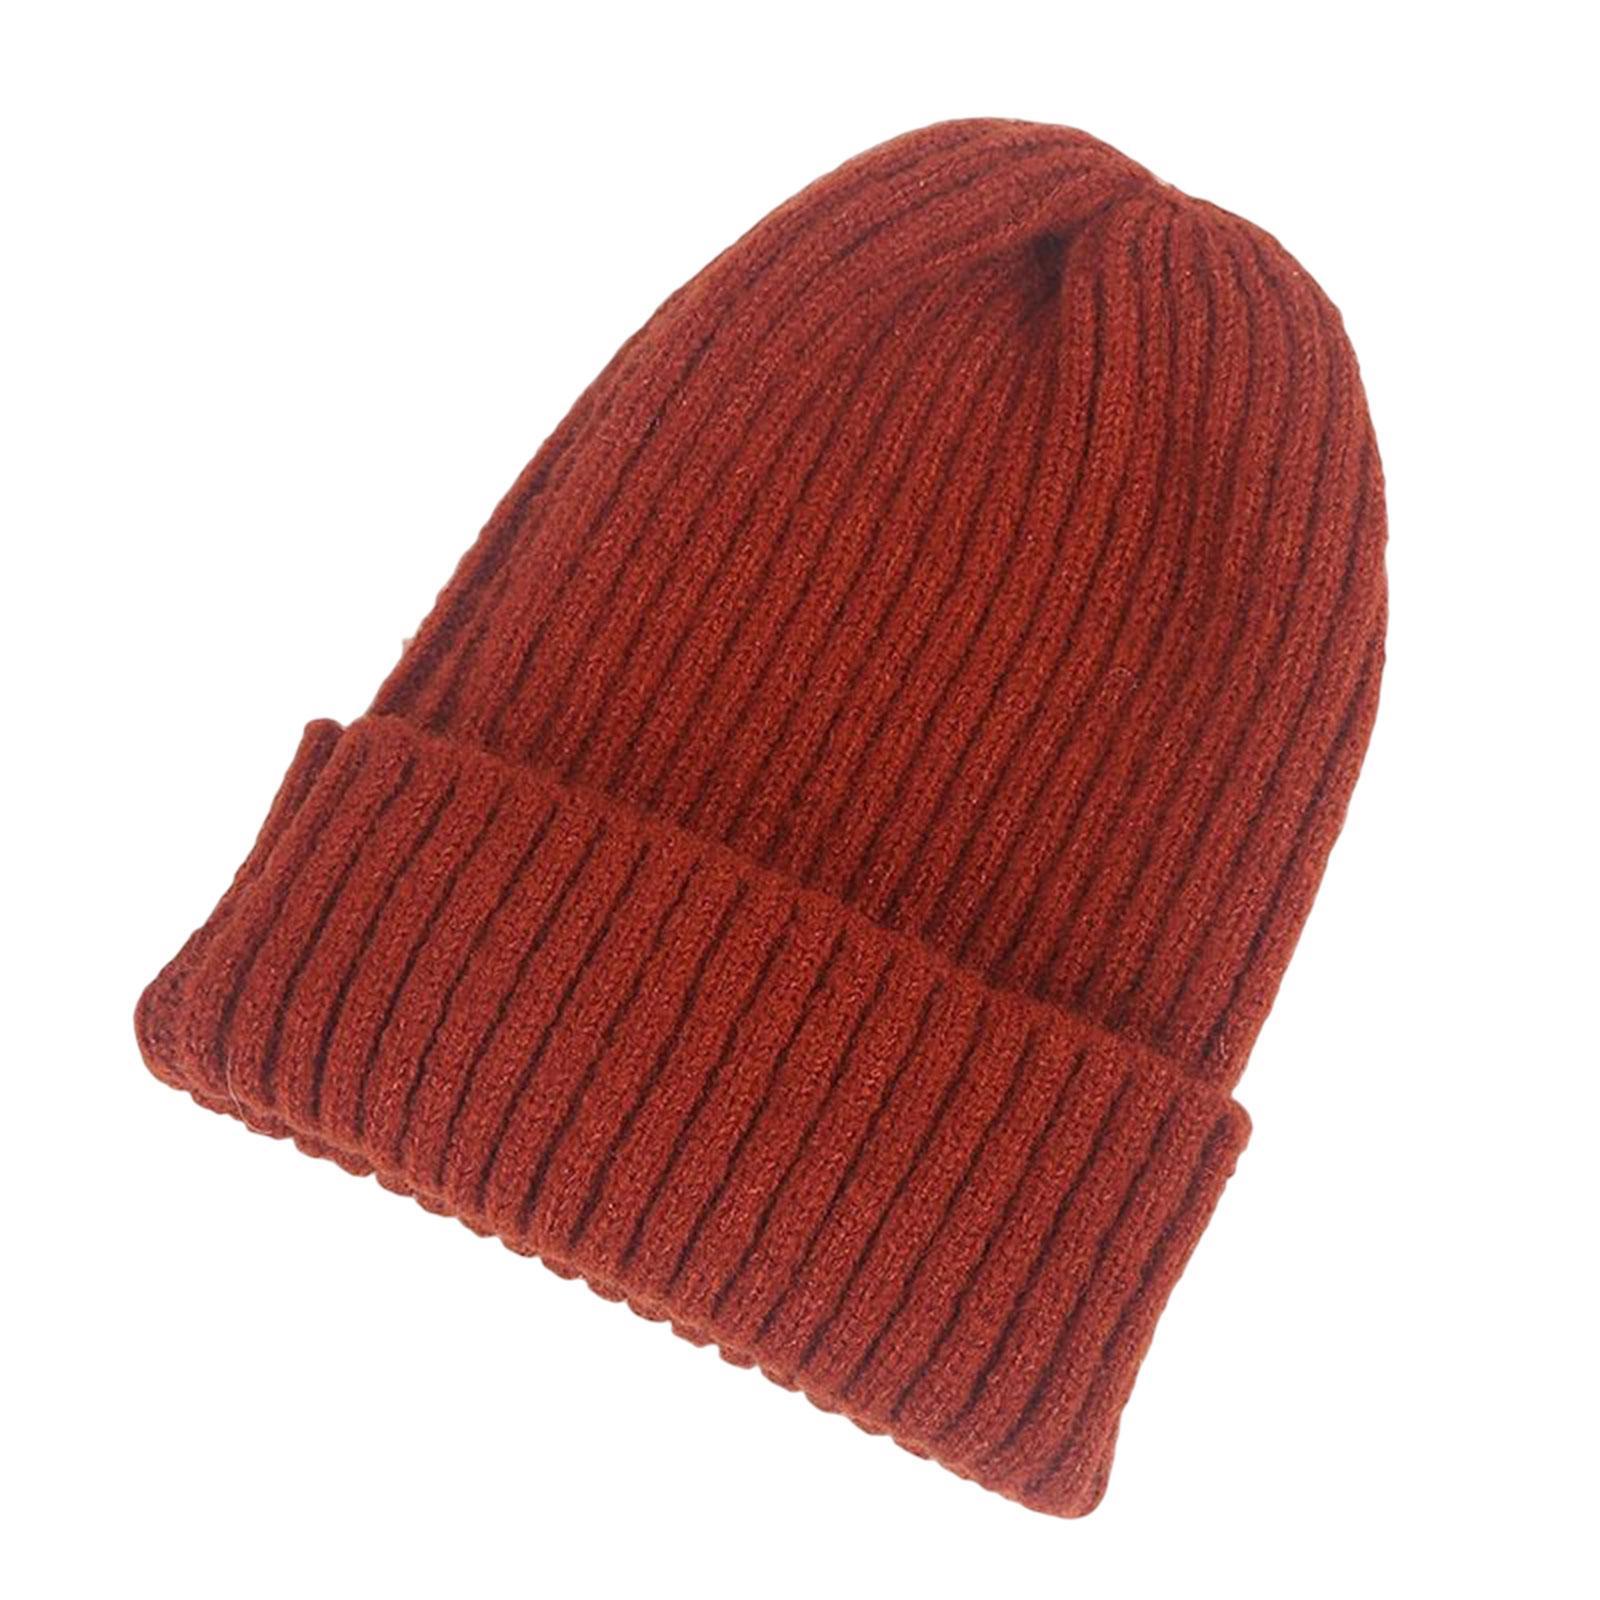 2 Winter Hat Warm Beanie Fashion Thick for Unisex Winter Activities Skiing